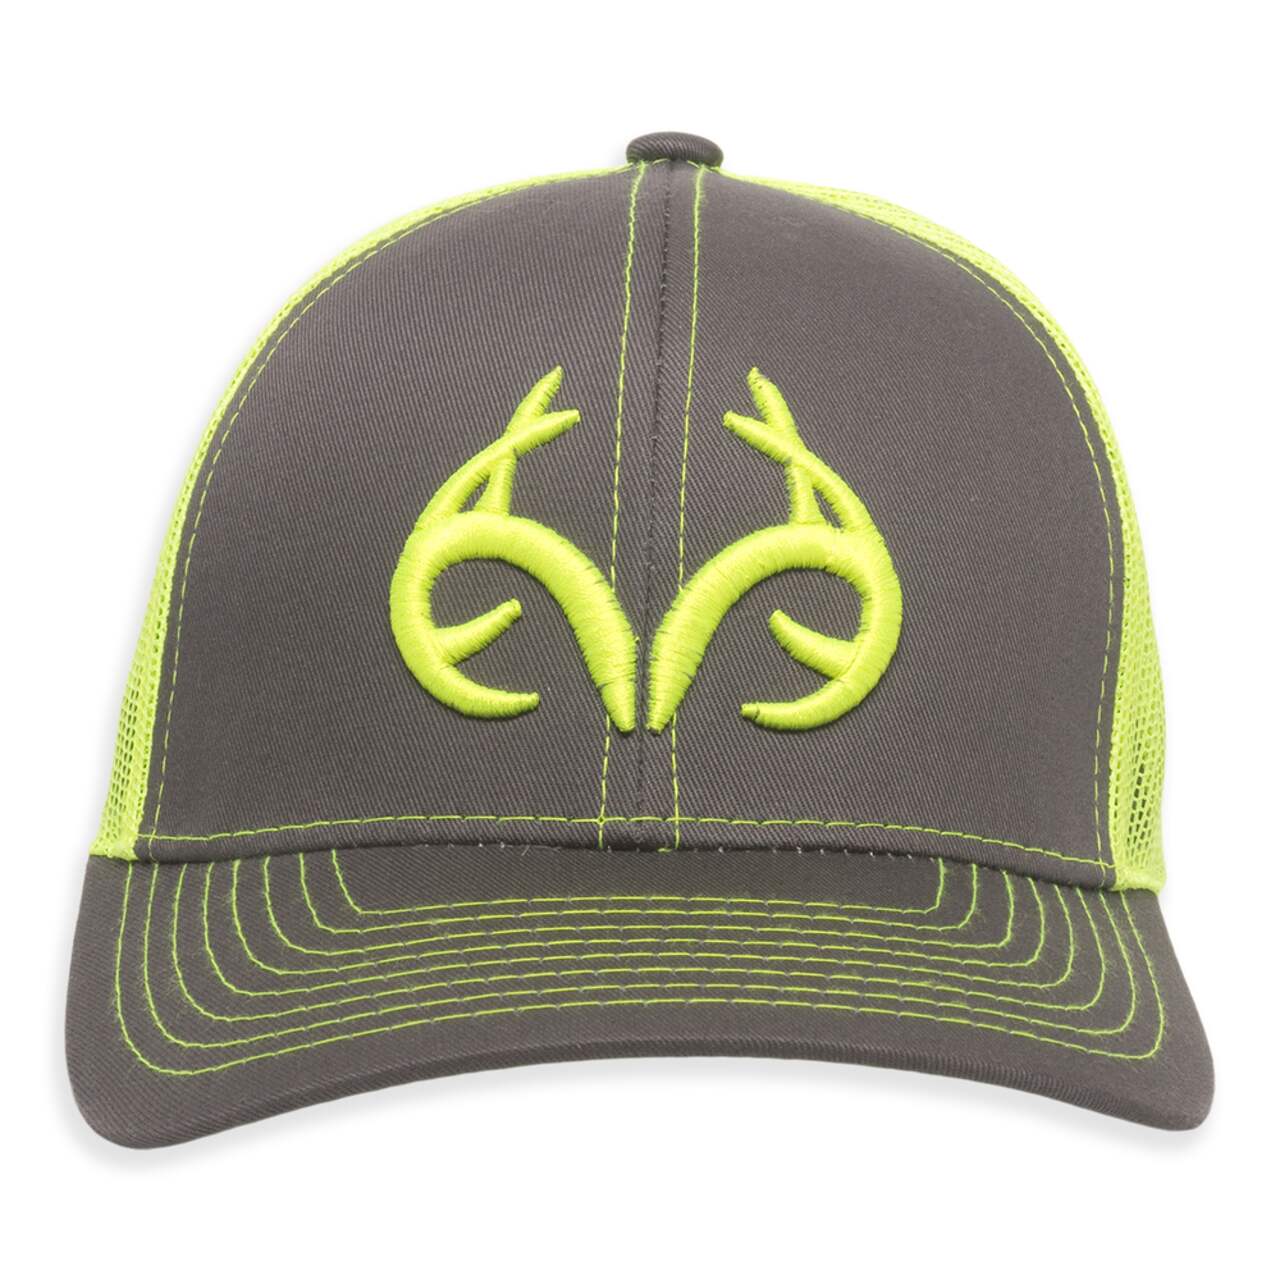 https://media-www.canadiantire.ca/product/playing/hunting/hunting-apparel-footwear/1759505/hat-realtree-charcoal-neon-yellow-de6d7e34-5bab-4a76-a157-bf0403787276.png?imdensity=1&imwidth=640&impolicy=mZoom